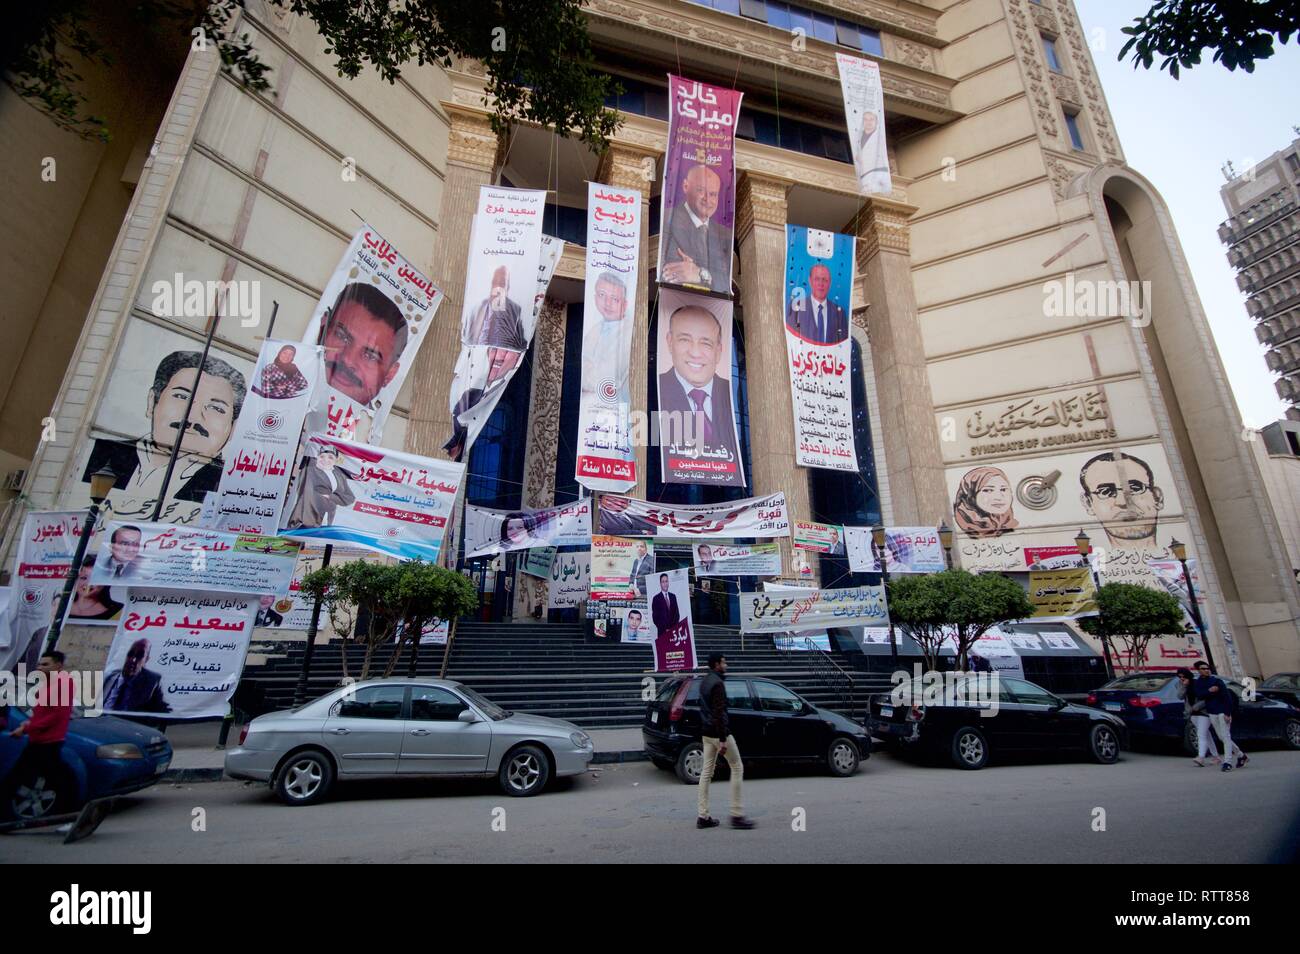 Protest banners outside the Syndicate of Journalists, Cairo, Egypt Stock Photo